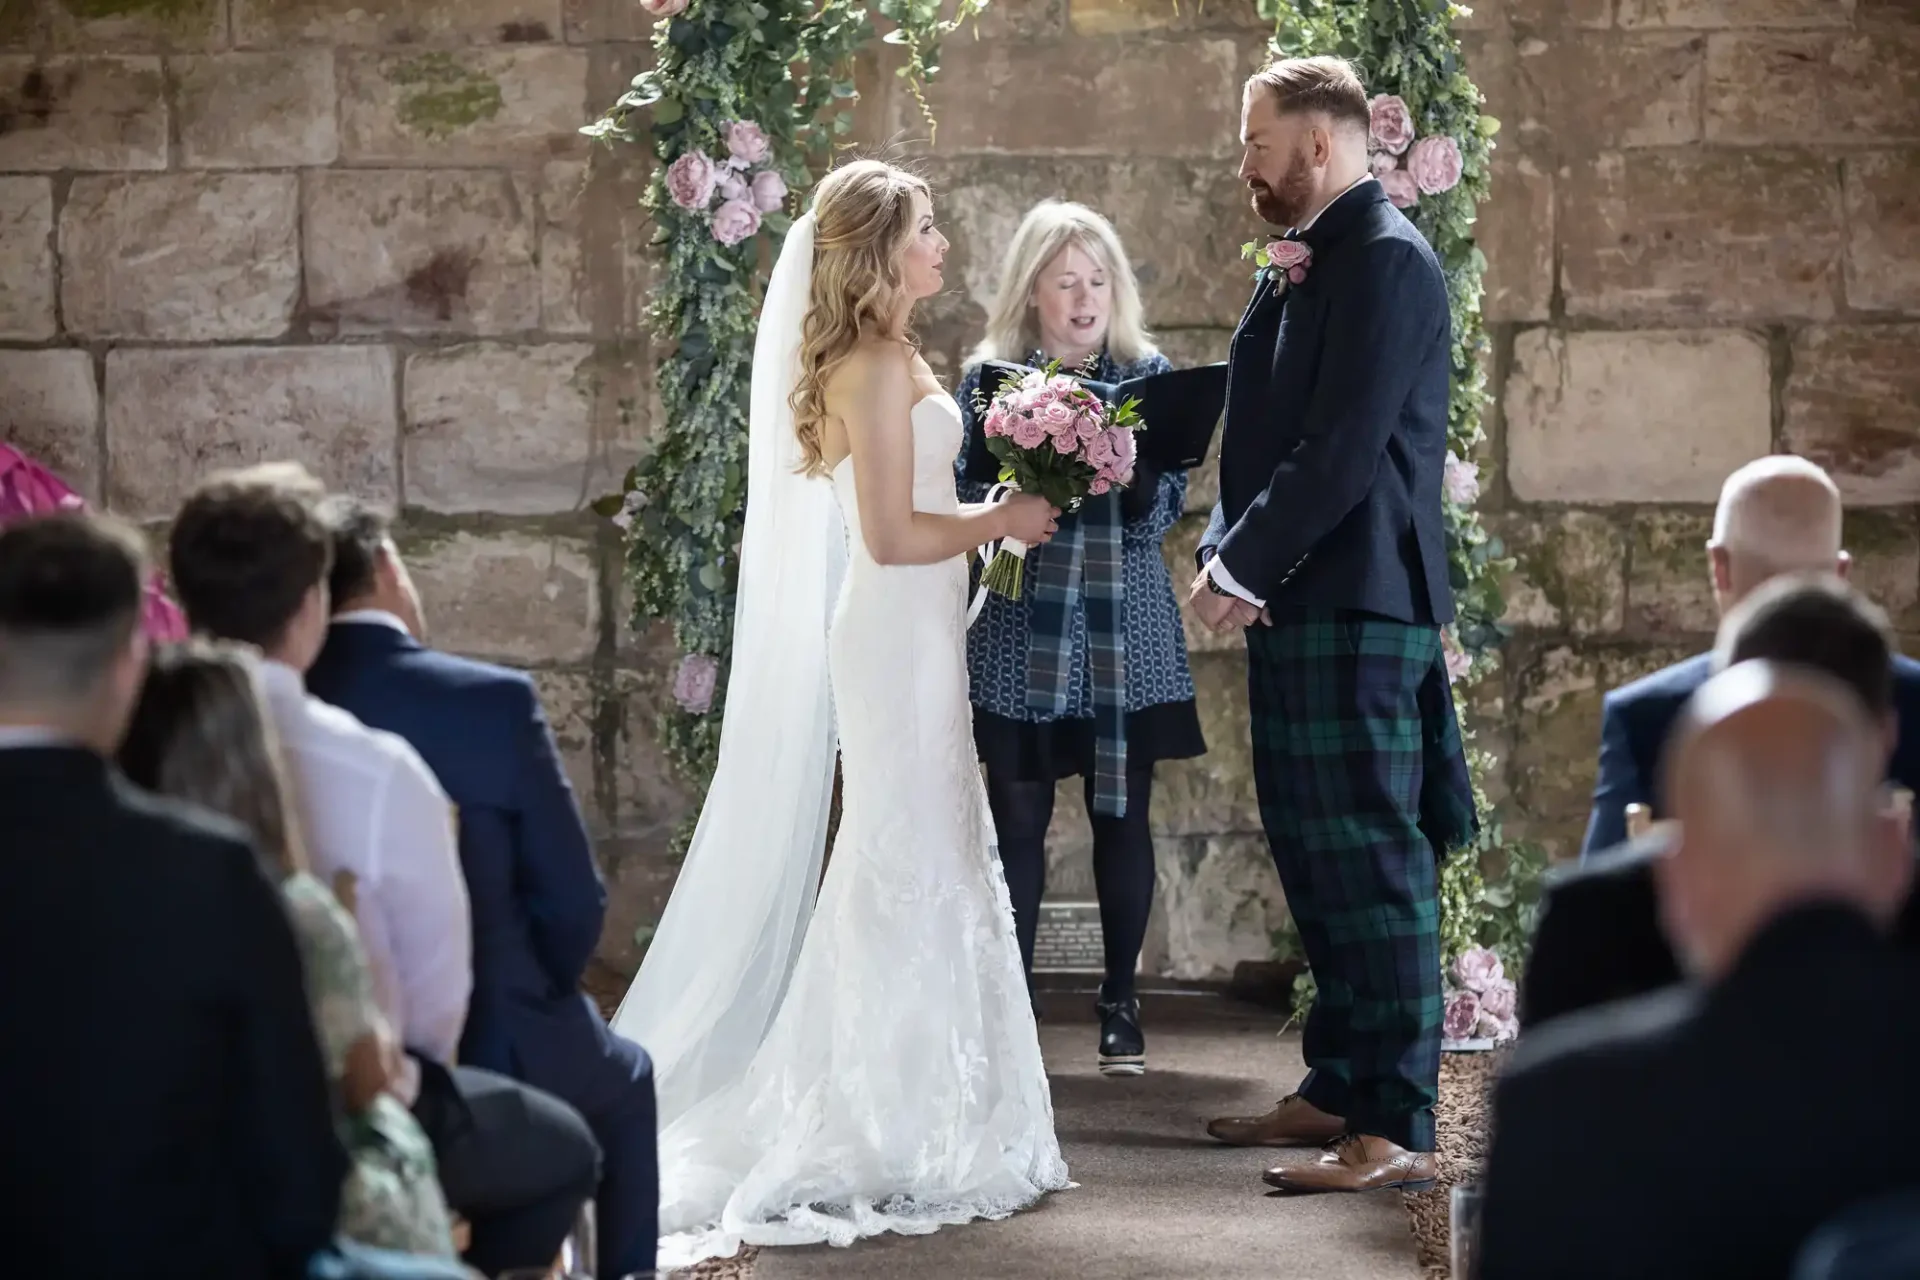 Bride in a white dress and groom in a kilt exchanging vows at a wedding ceremony, surrounded by guests and floral decorations.